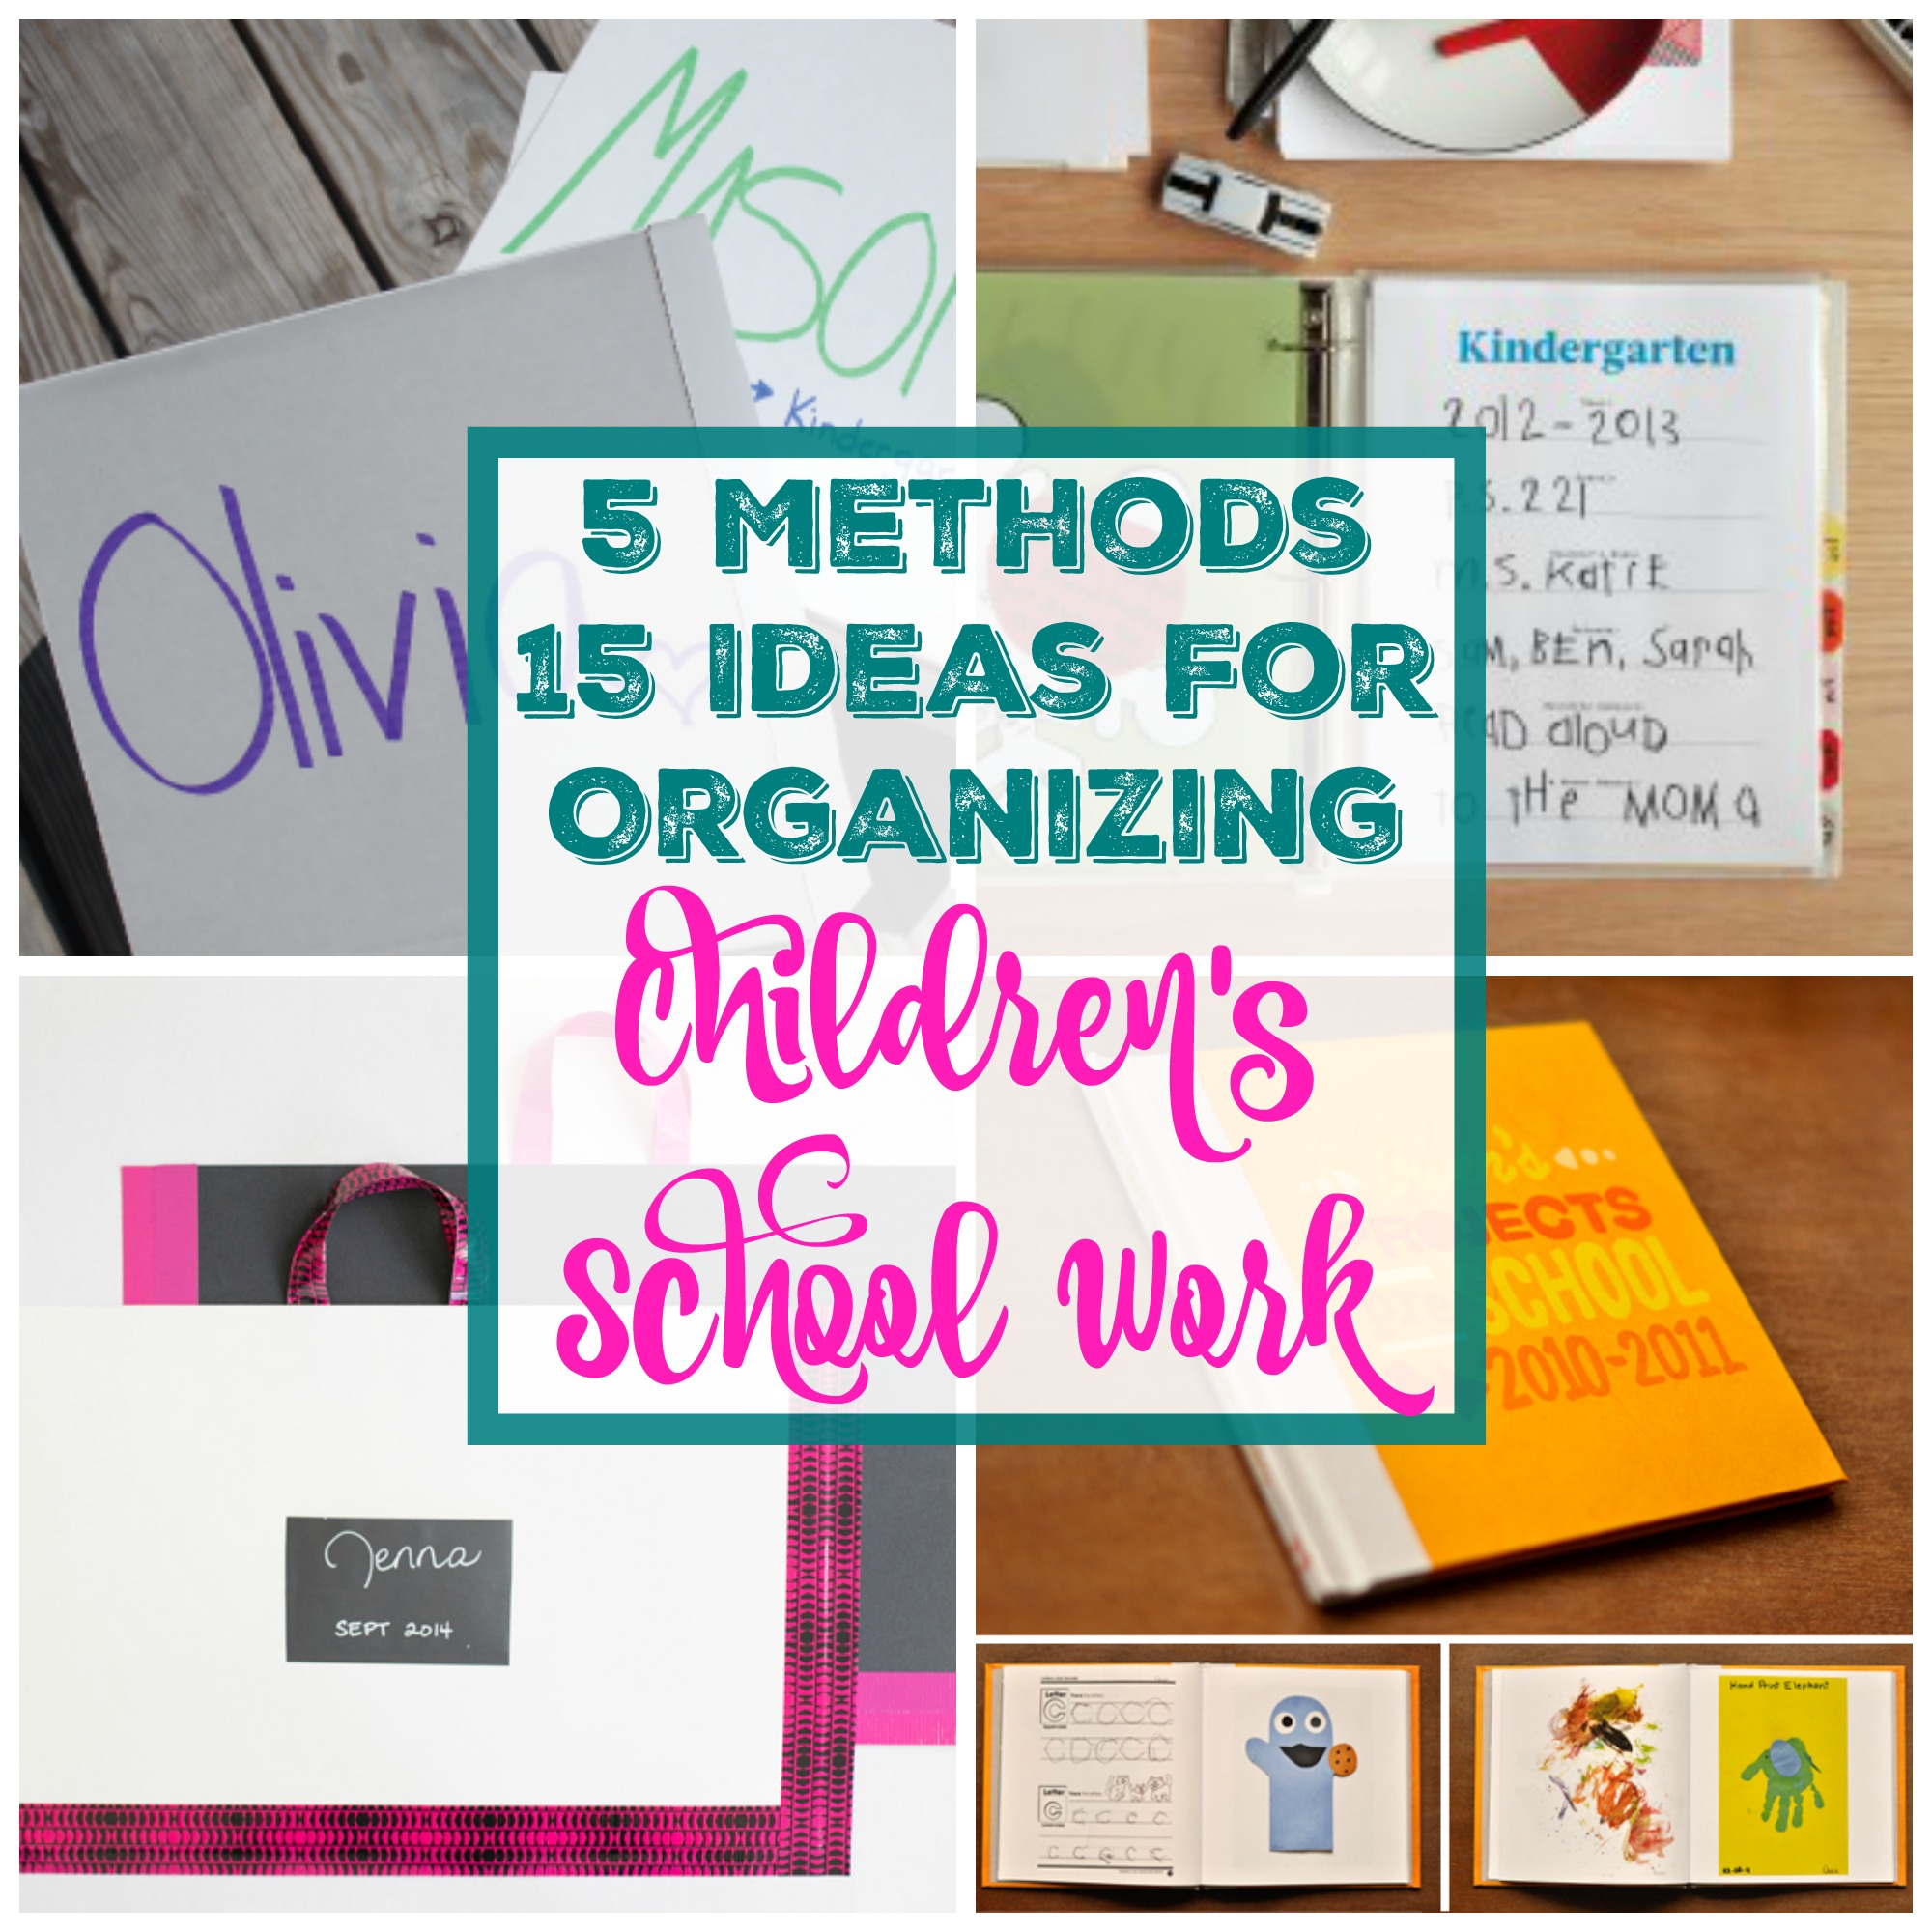 15 Fantastic Ideas for Organizing and Storing Children's School Work